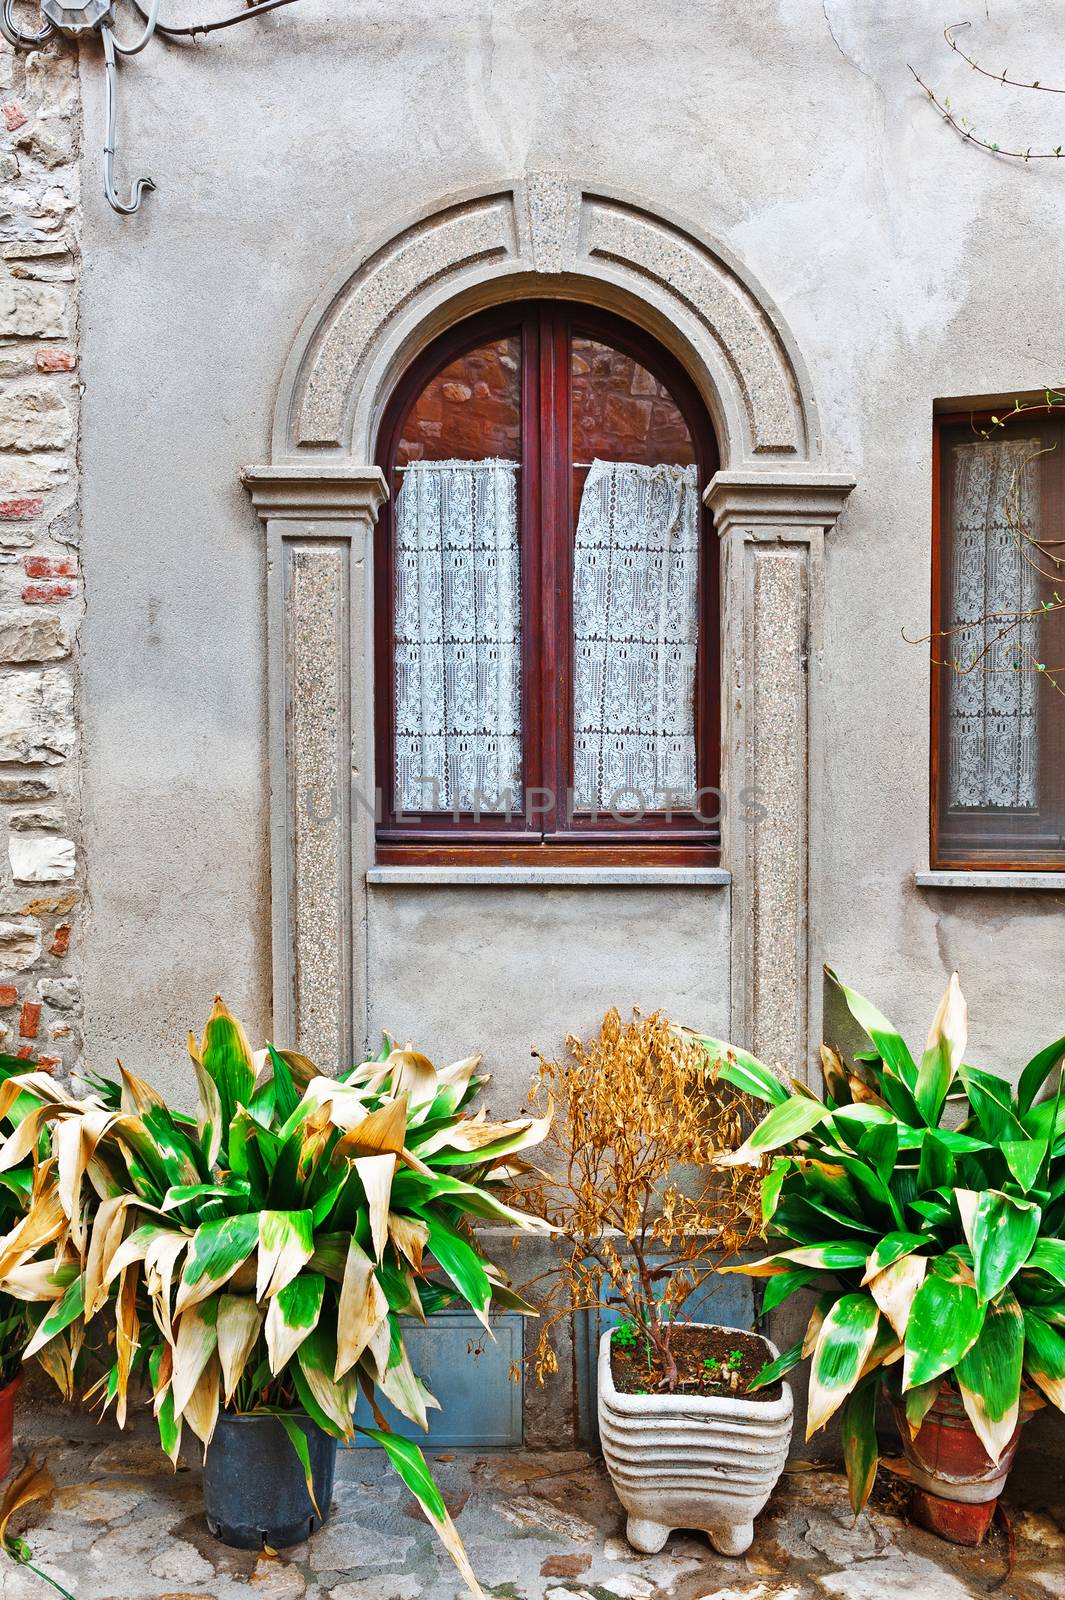 Window on the Facade of Italian House Decorated with Fresh Flower